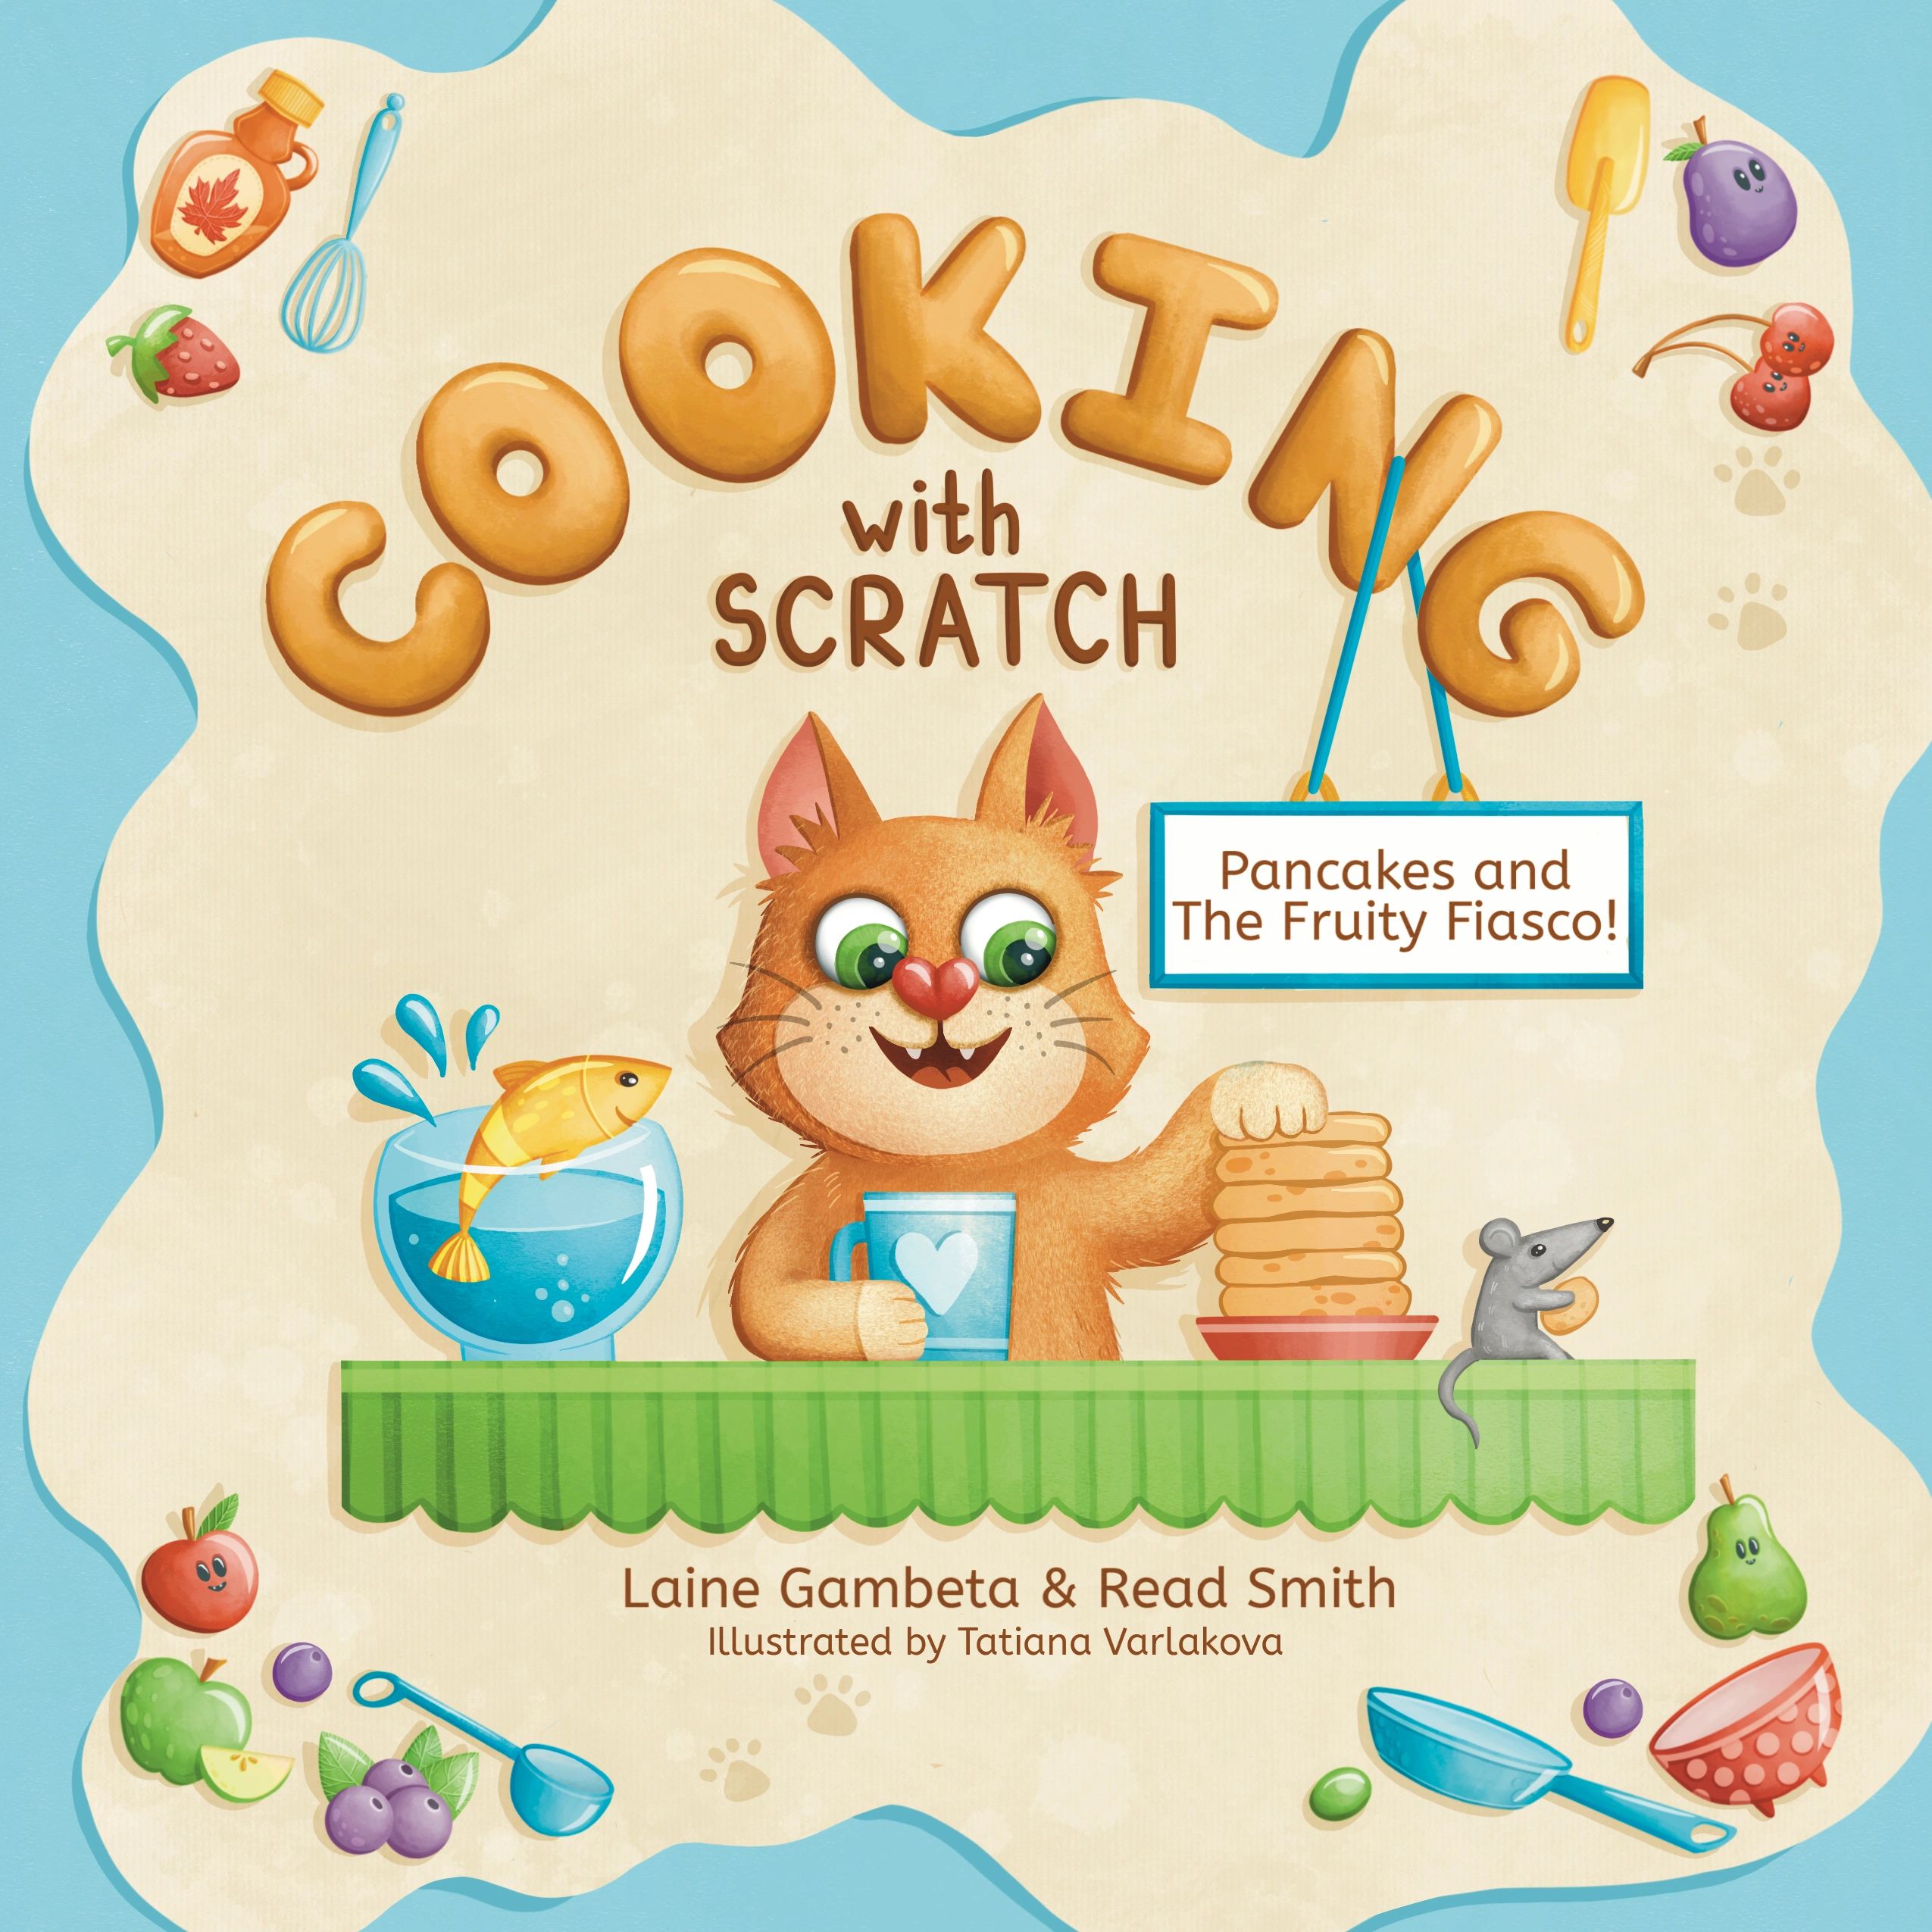 Youth full color children's book cooking with scratch adventures in kitchen